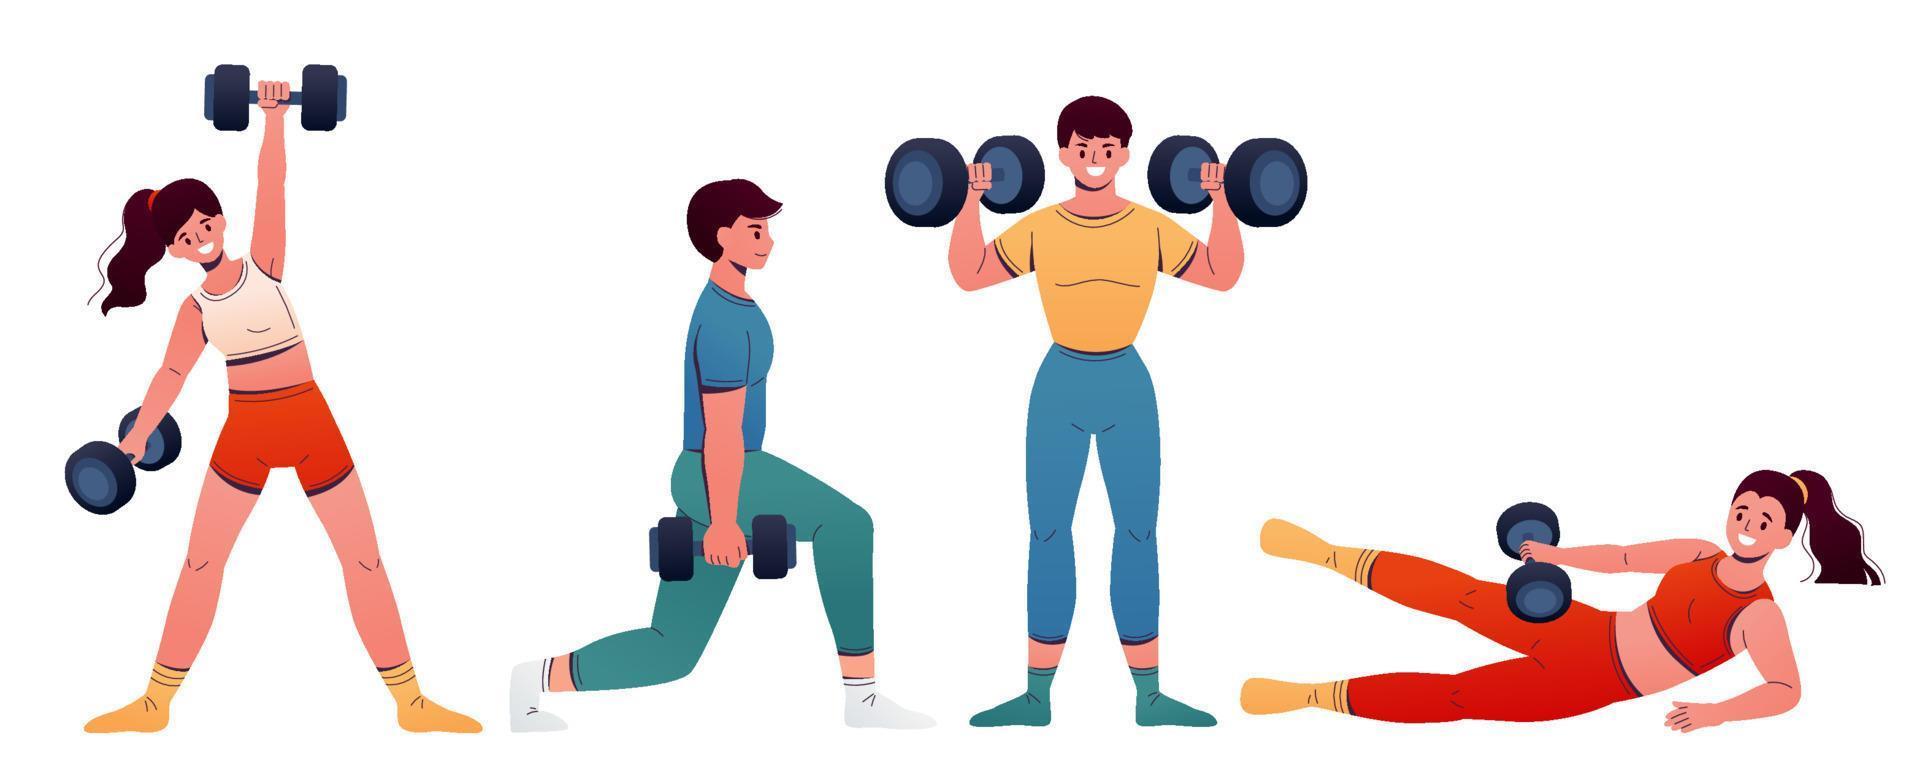 Flat design illustration of men and women lifting heavy dumbbell weights. People characters isolated on white background, concept of gym training and sport exercise. vector